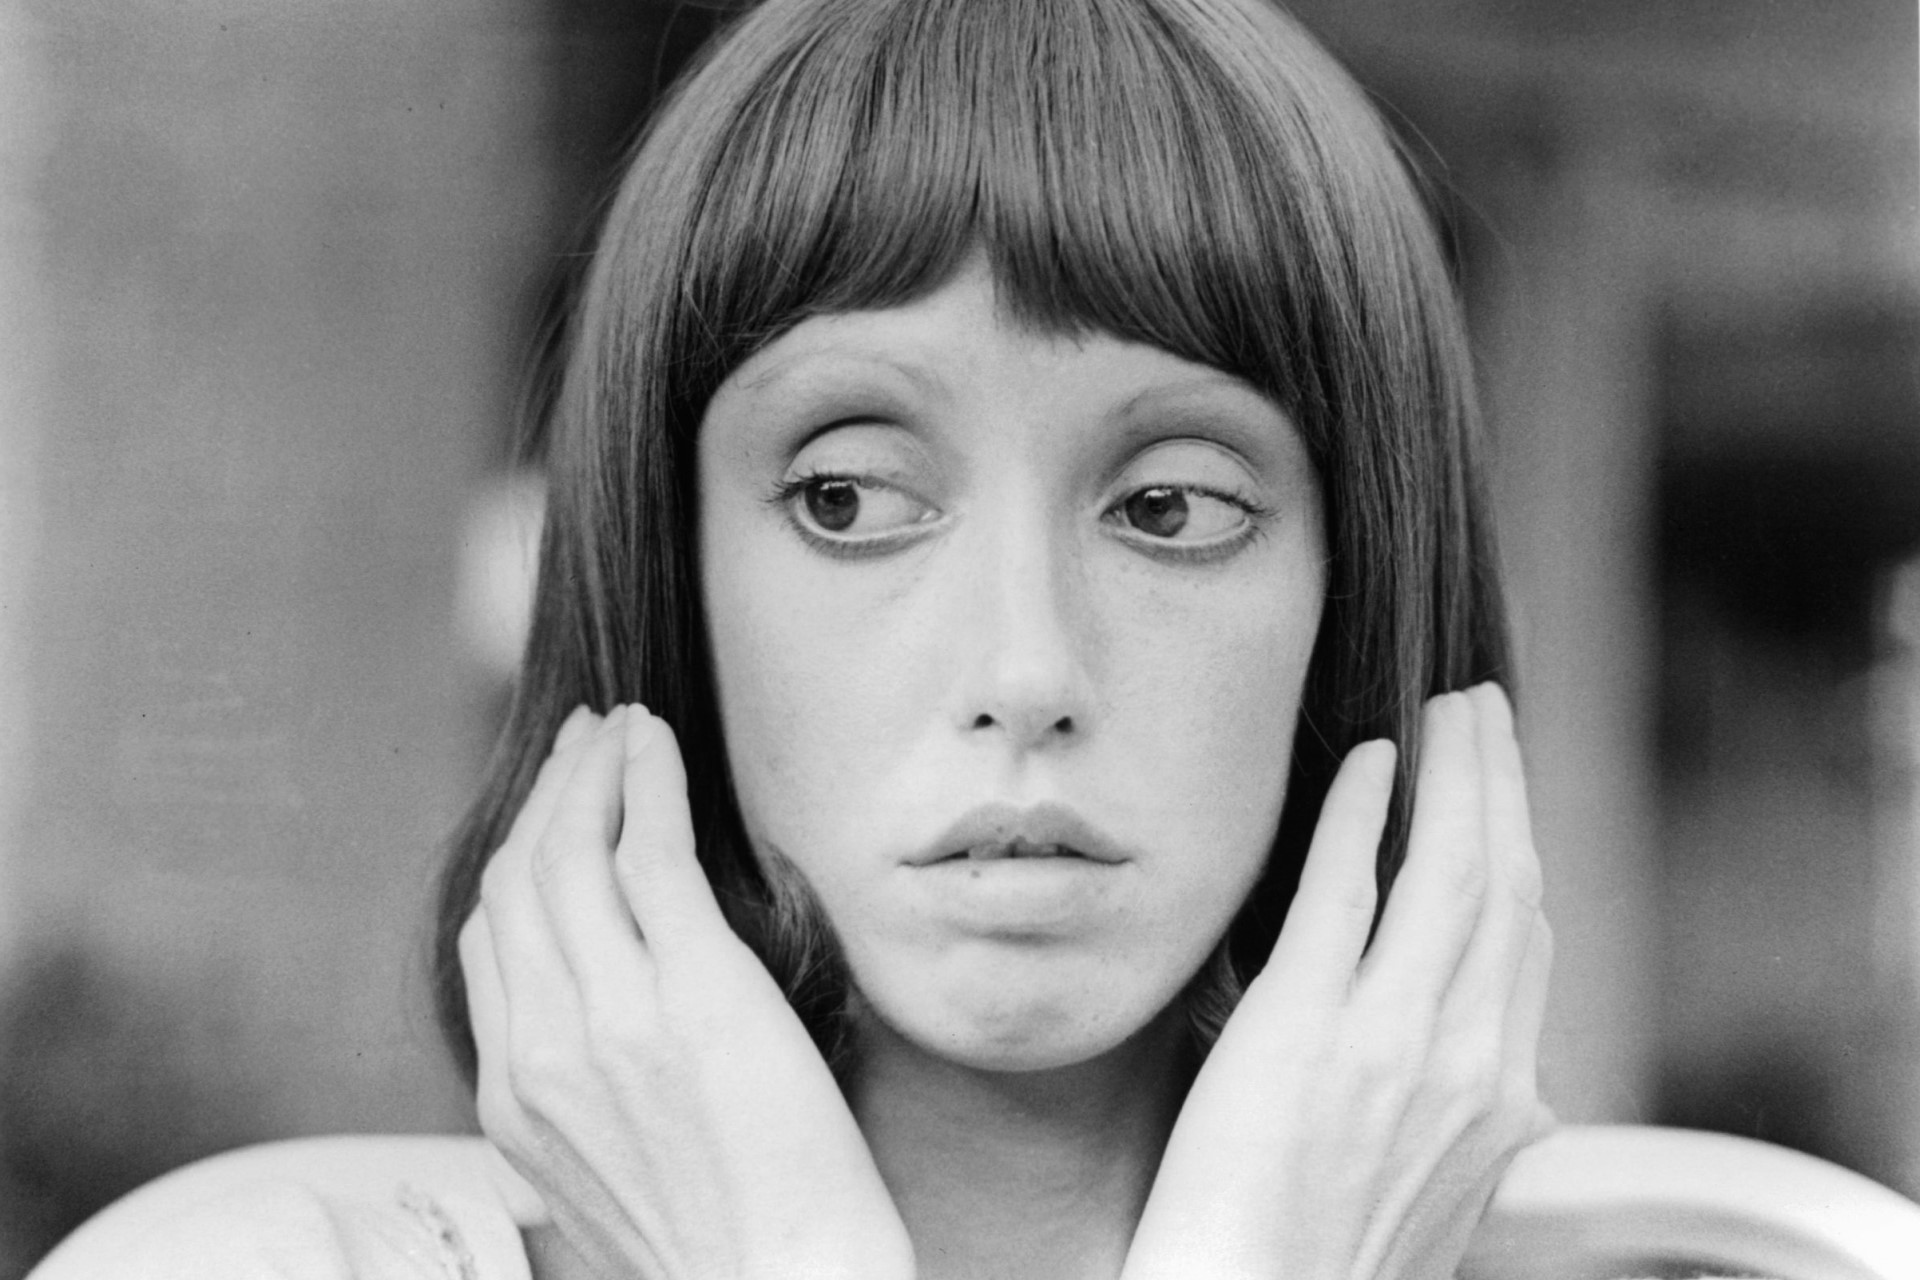 Goodbye to actress Shelley Duvall